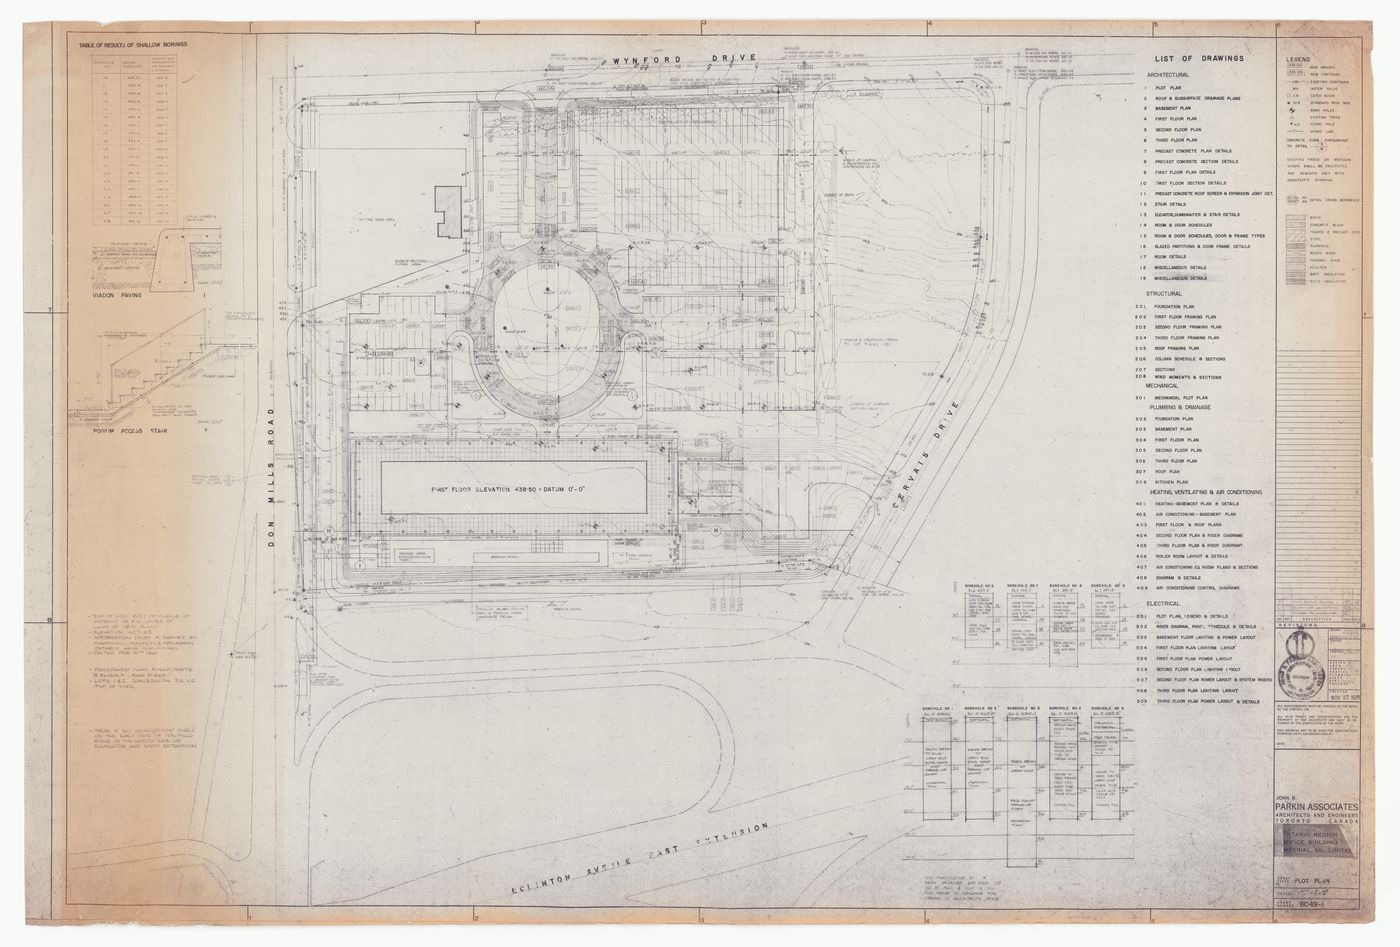 Construction plot plan for Imperial Oil Limited, Ontario Region Office Building, North York